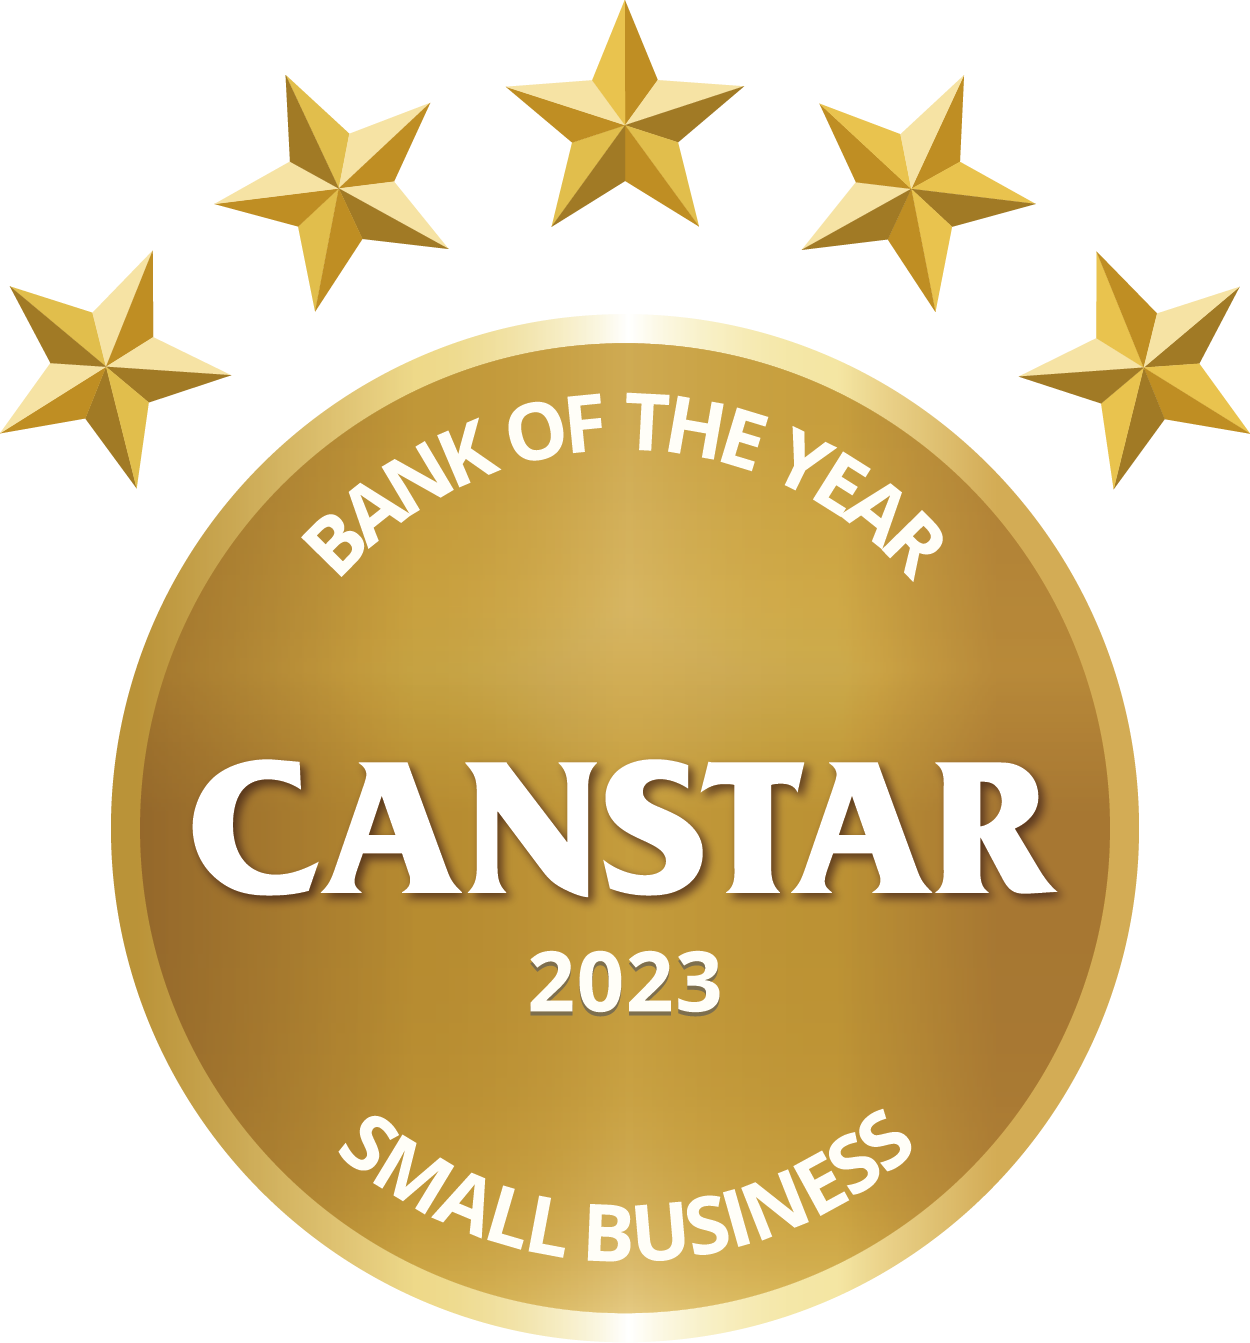 Canstar 2022 Bank of the Year, Small Business Award logo